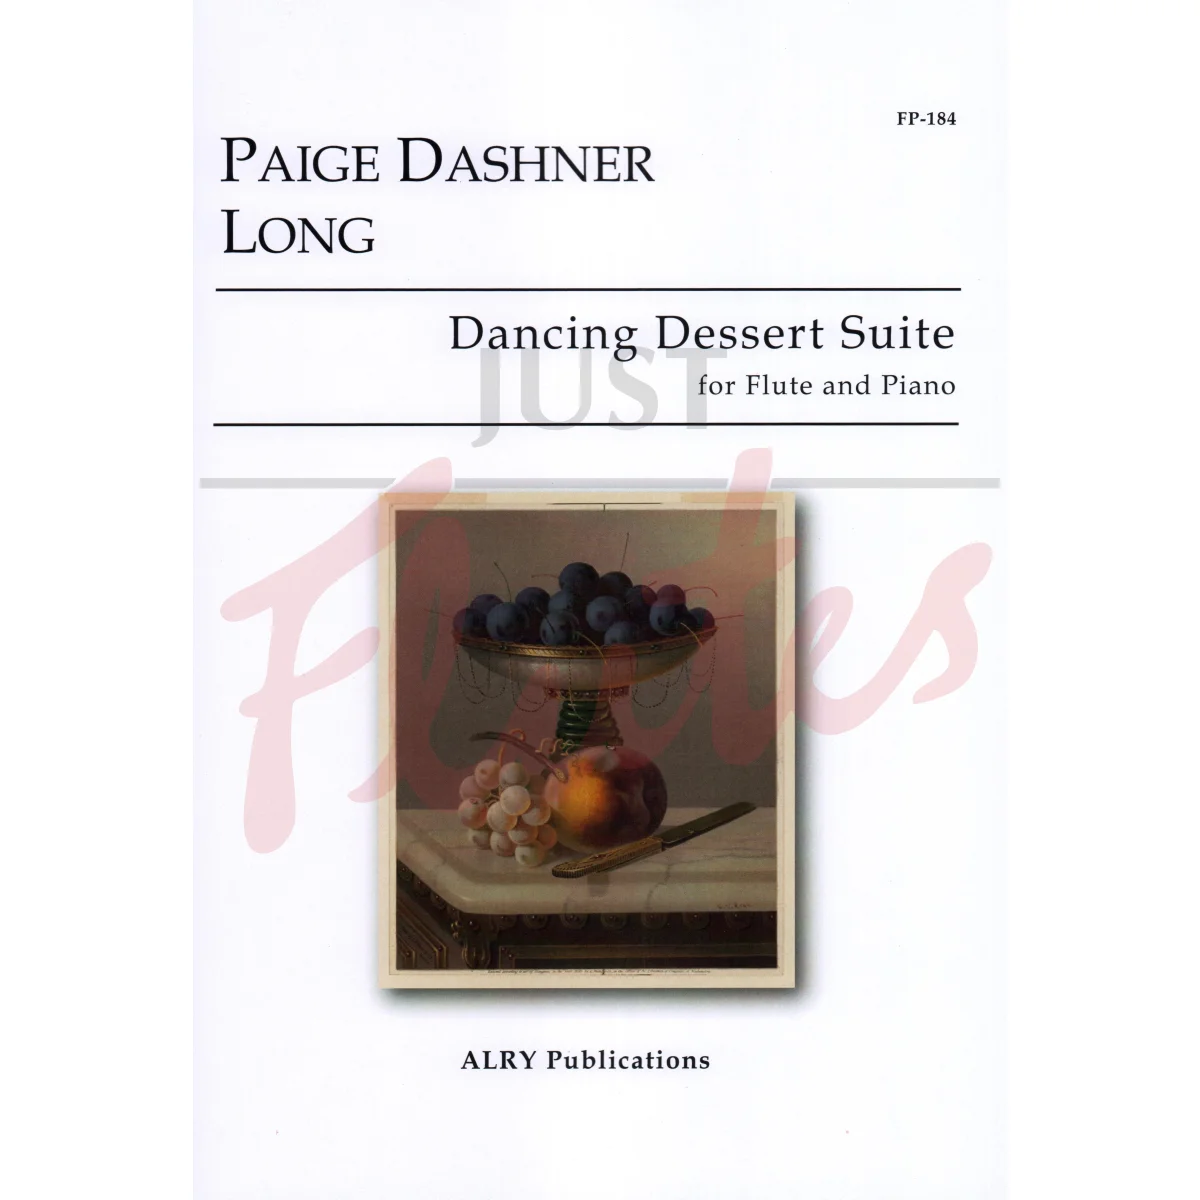 Dancing Dessert Suite for Flute and Piano